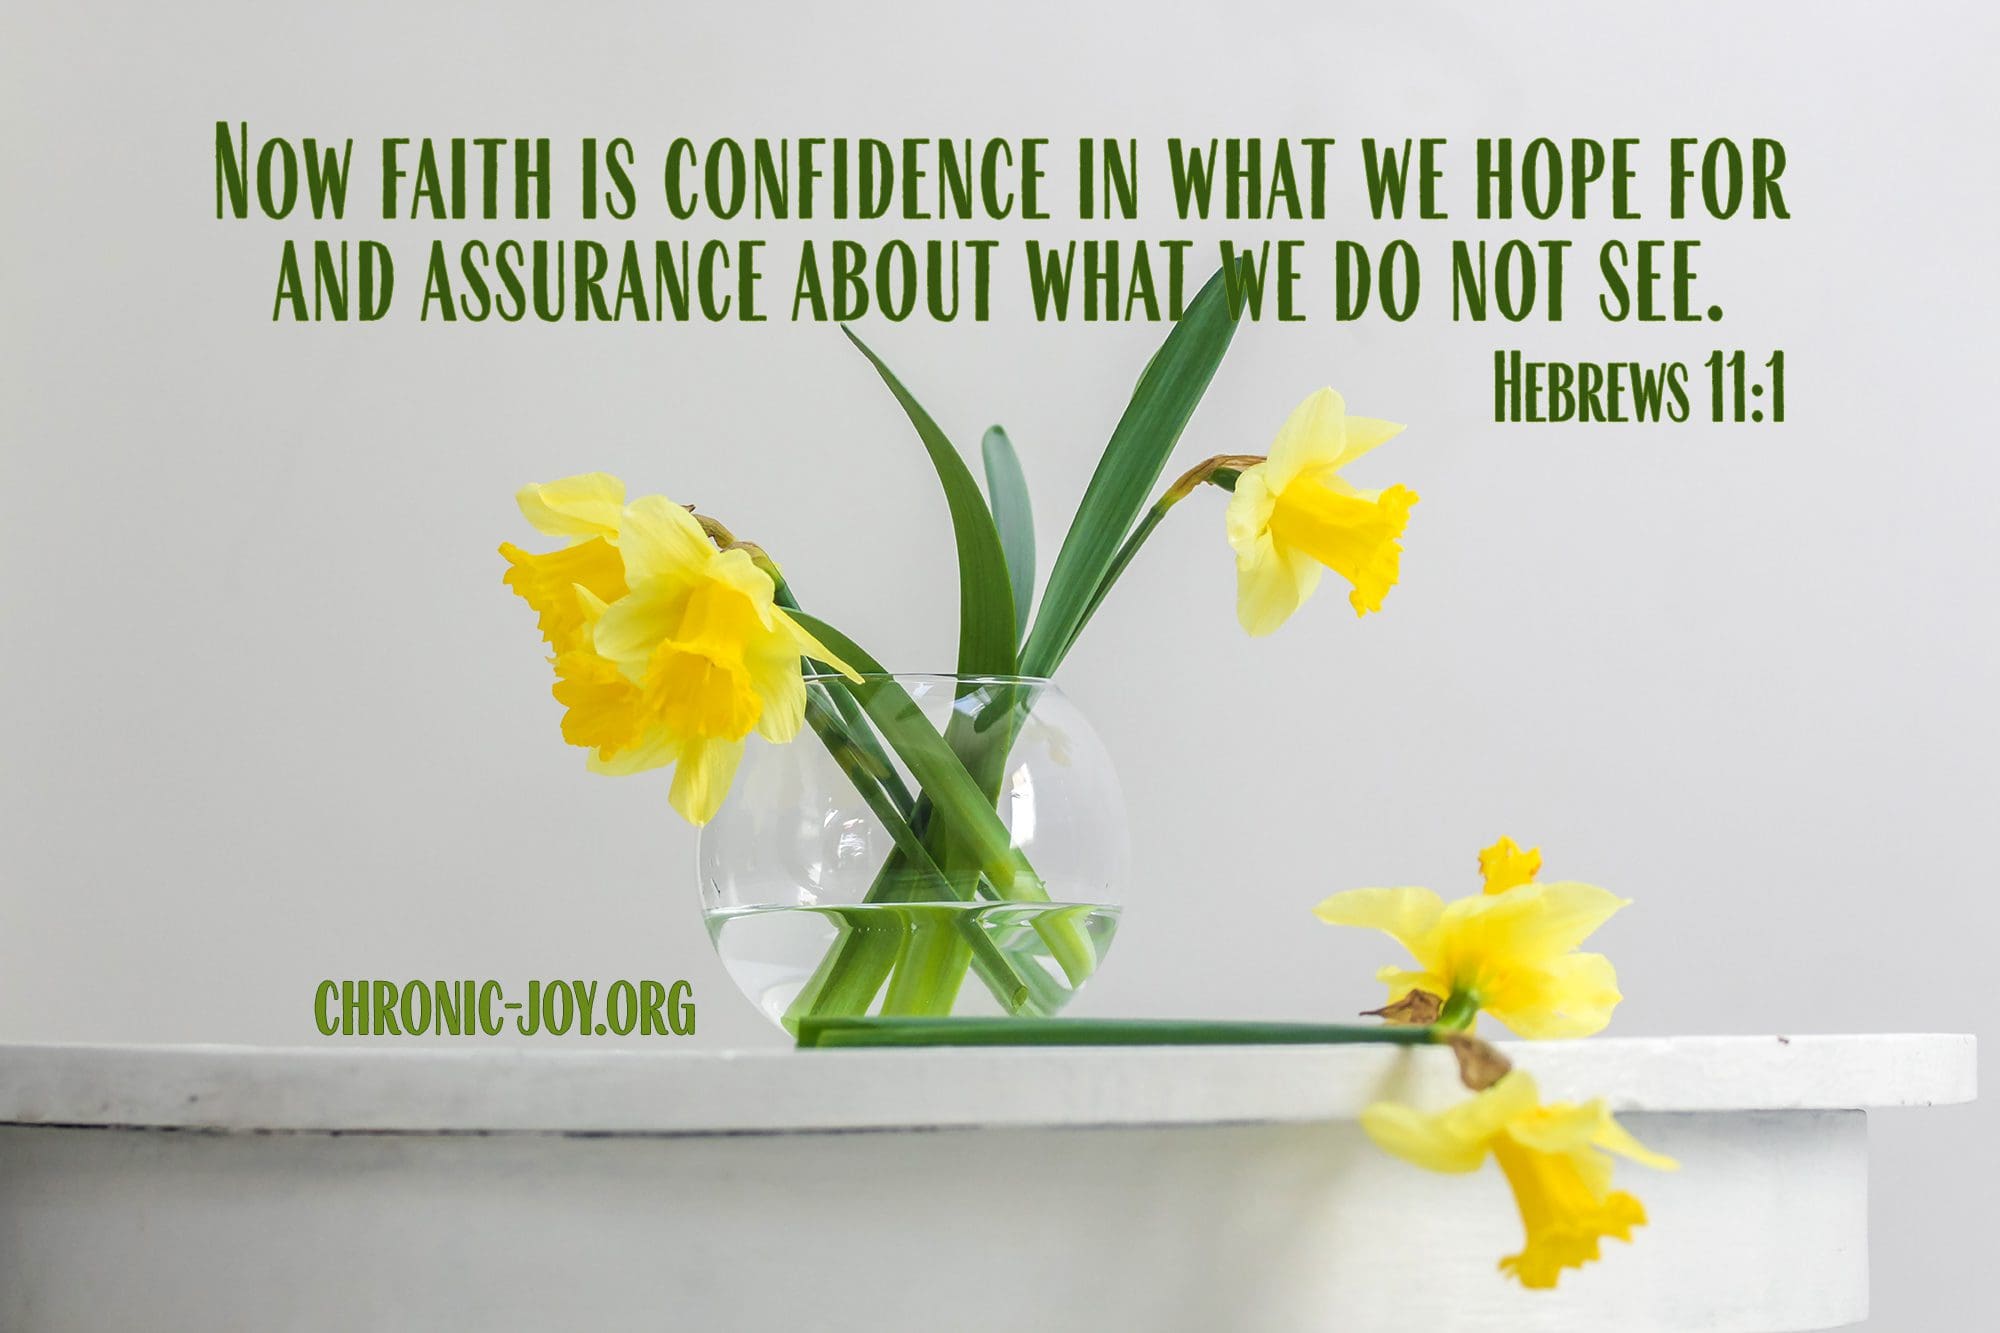 "Now faith is confidence in what we hope for and assurance about what we do not see." Hebrews 11:1